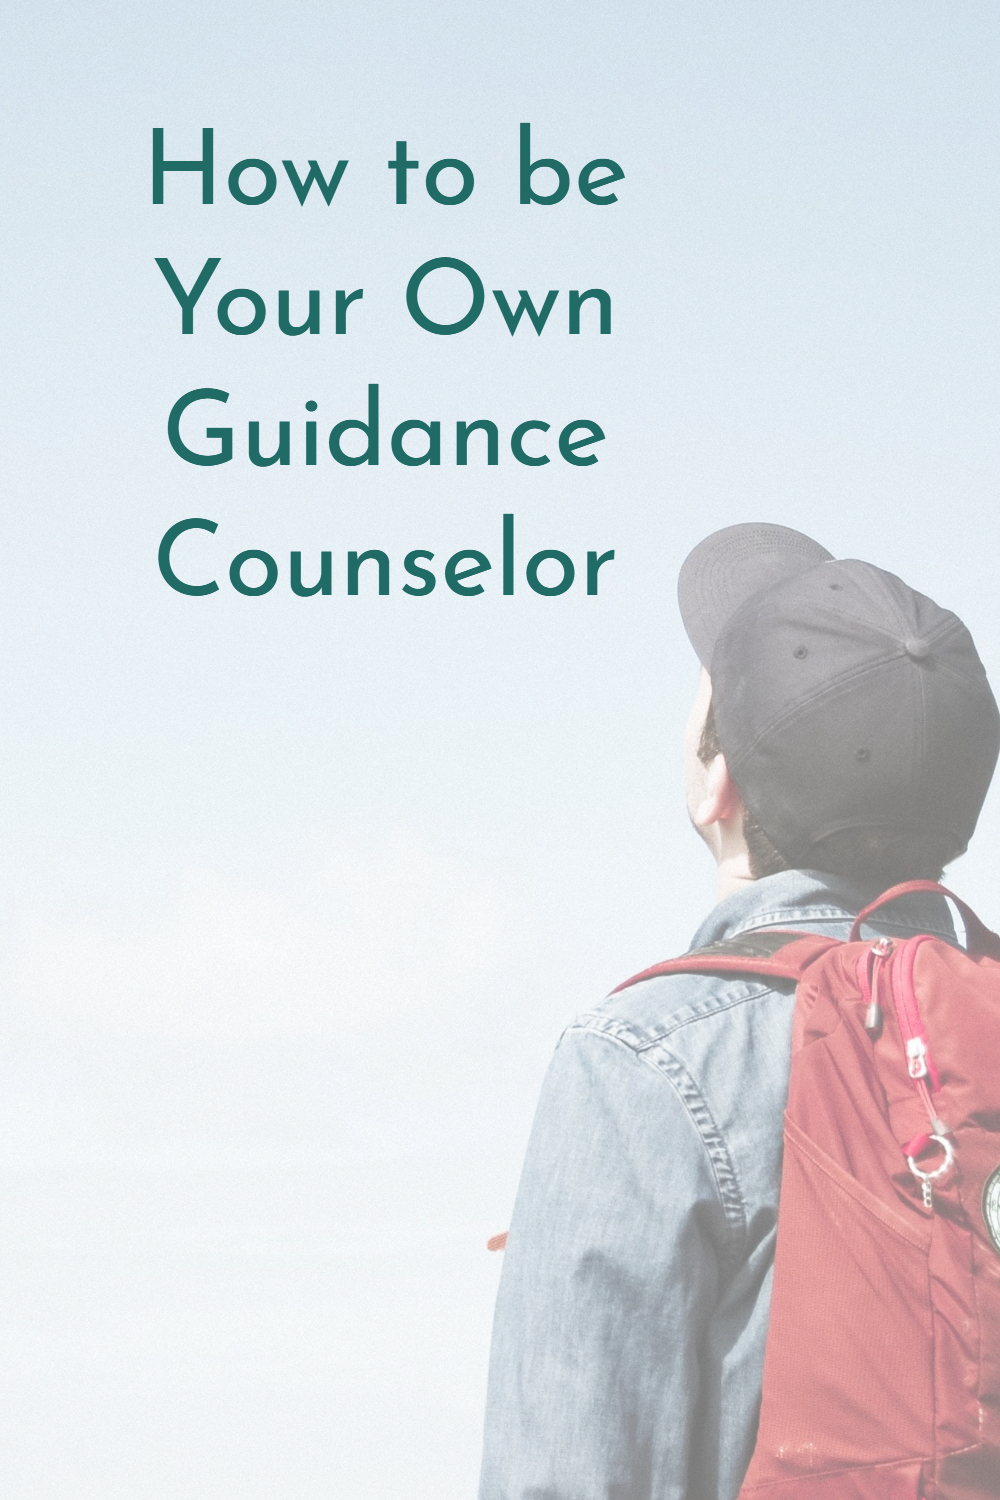 How To Be Your Own Guidance Counselor